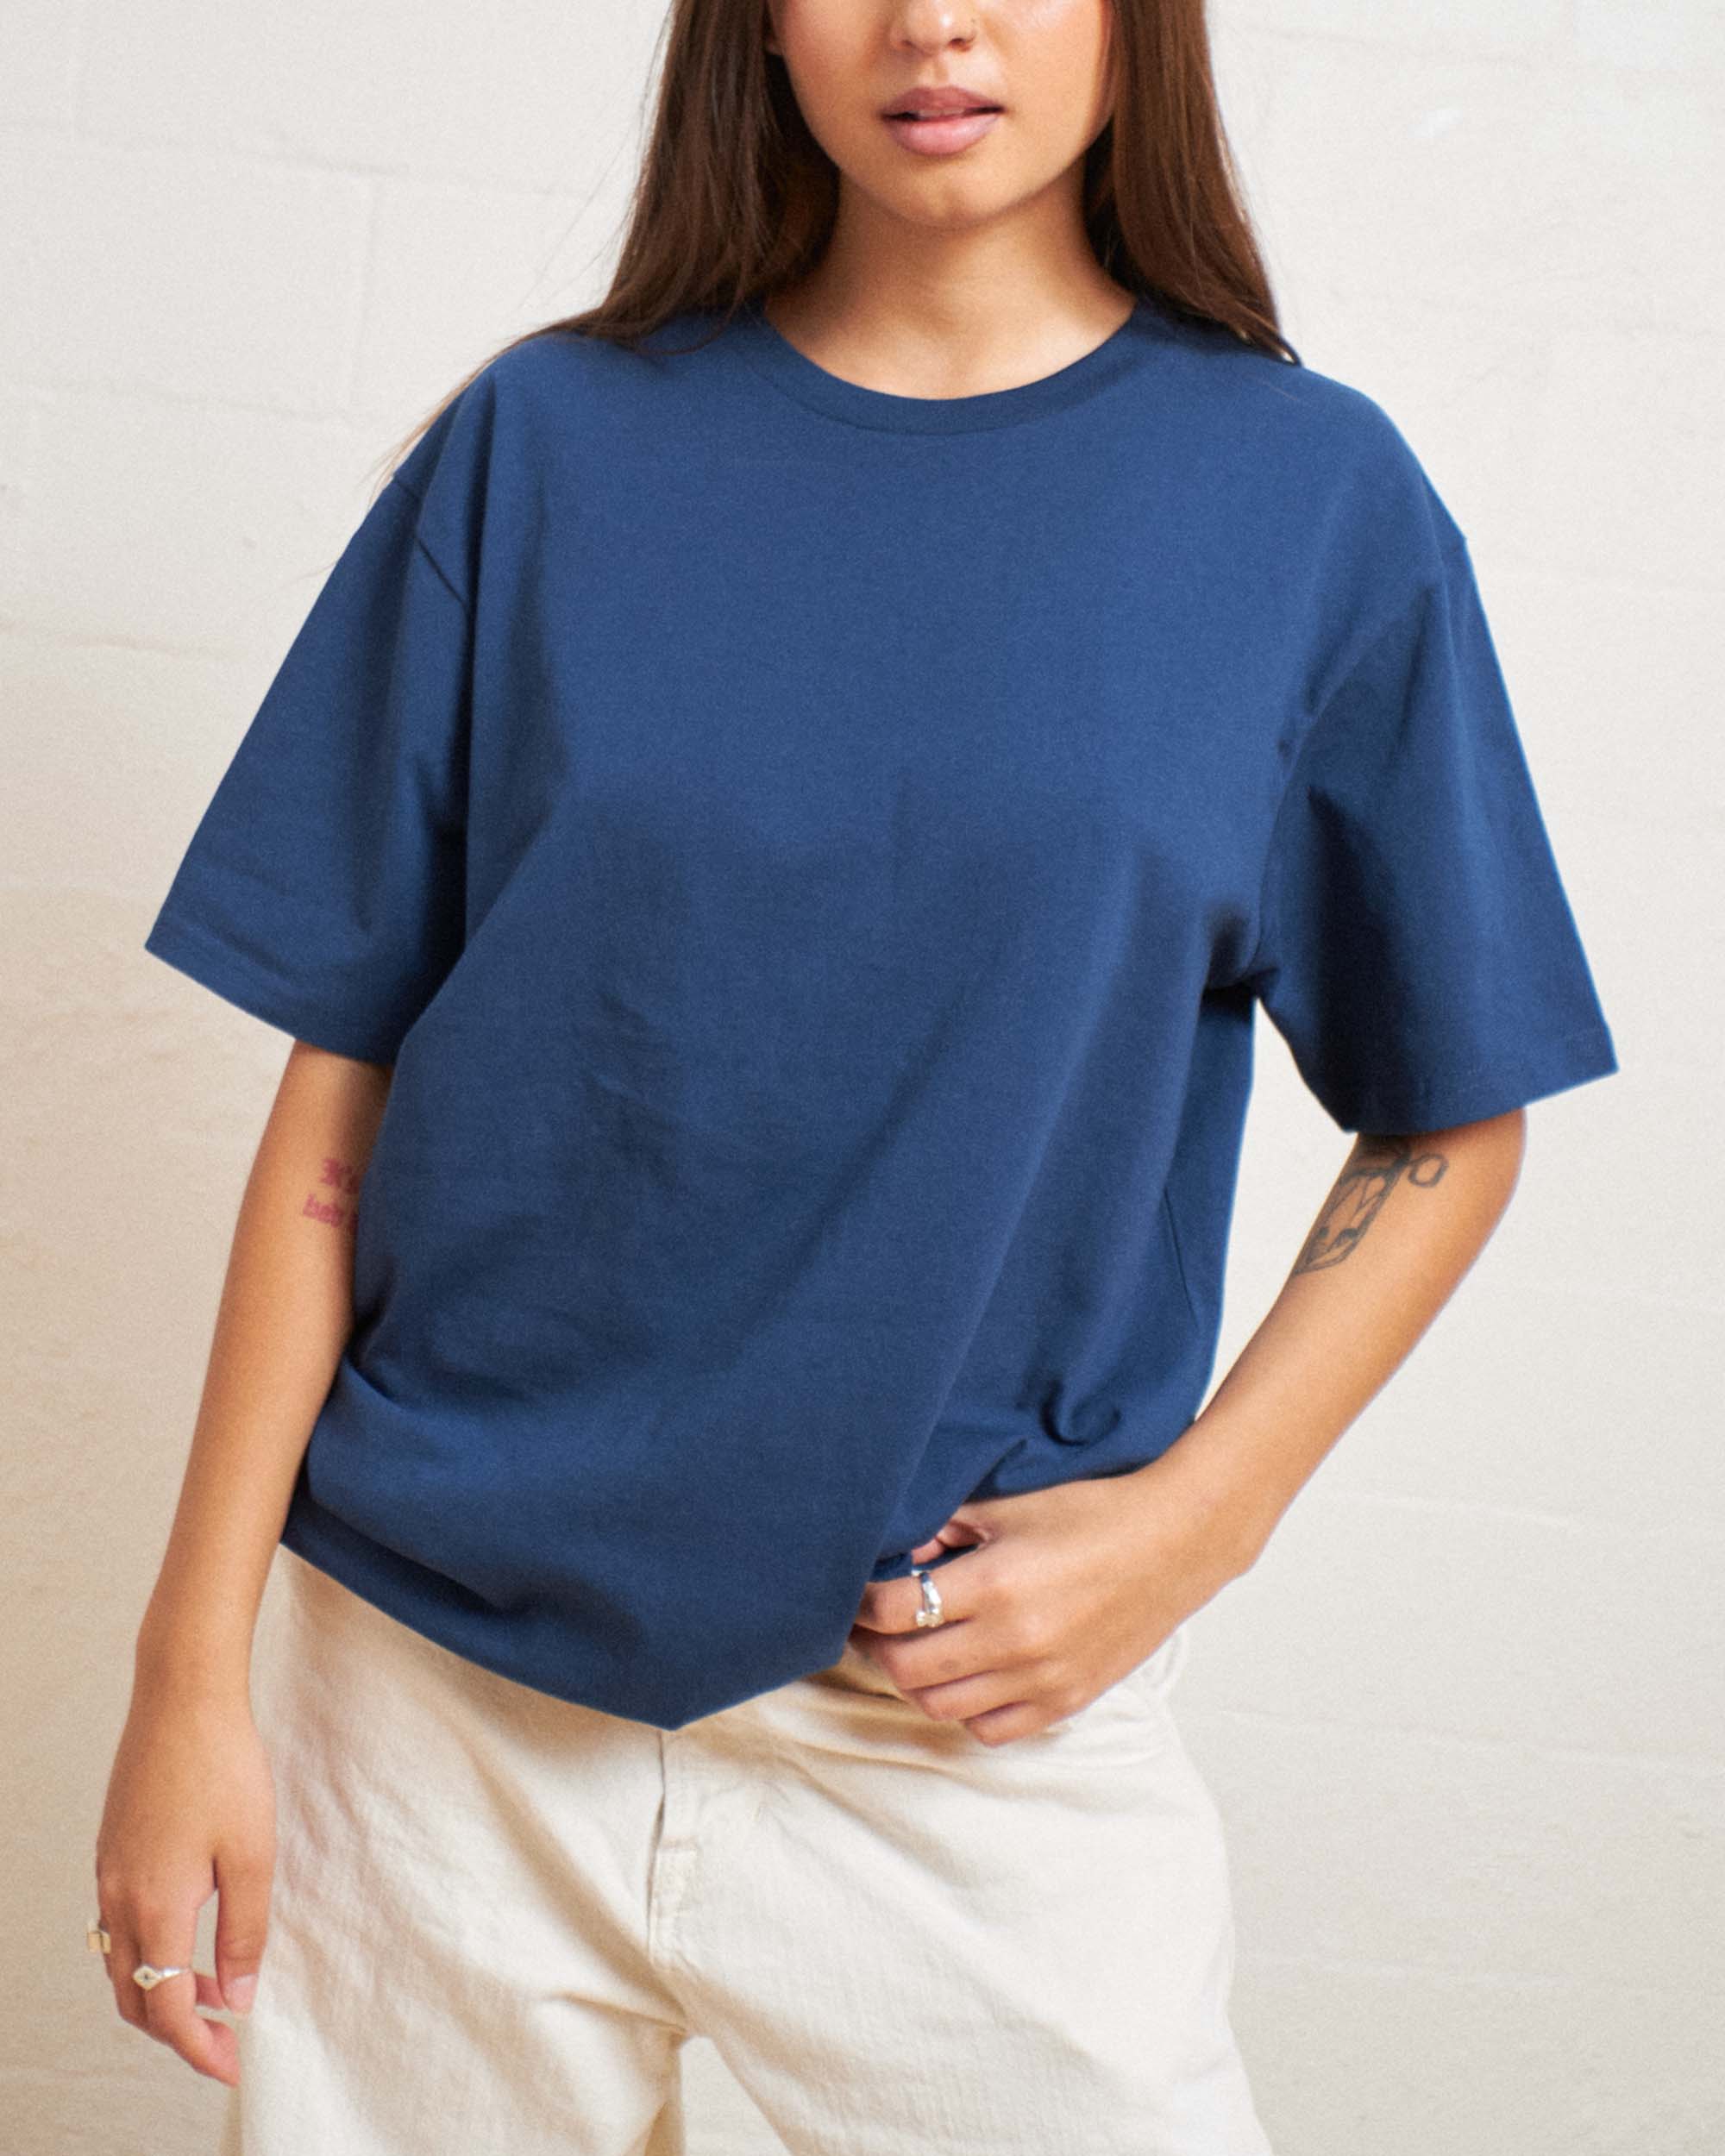 Classic Tee 3-Pack: Brown, Pale Blue, Navy